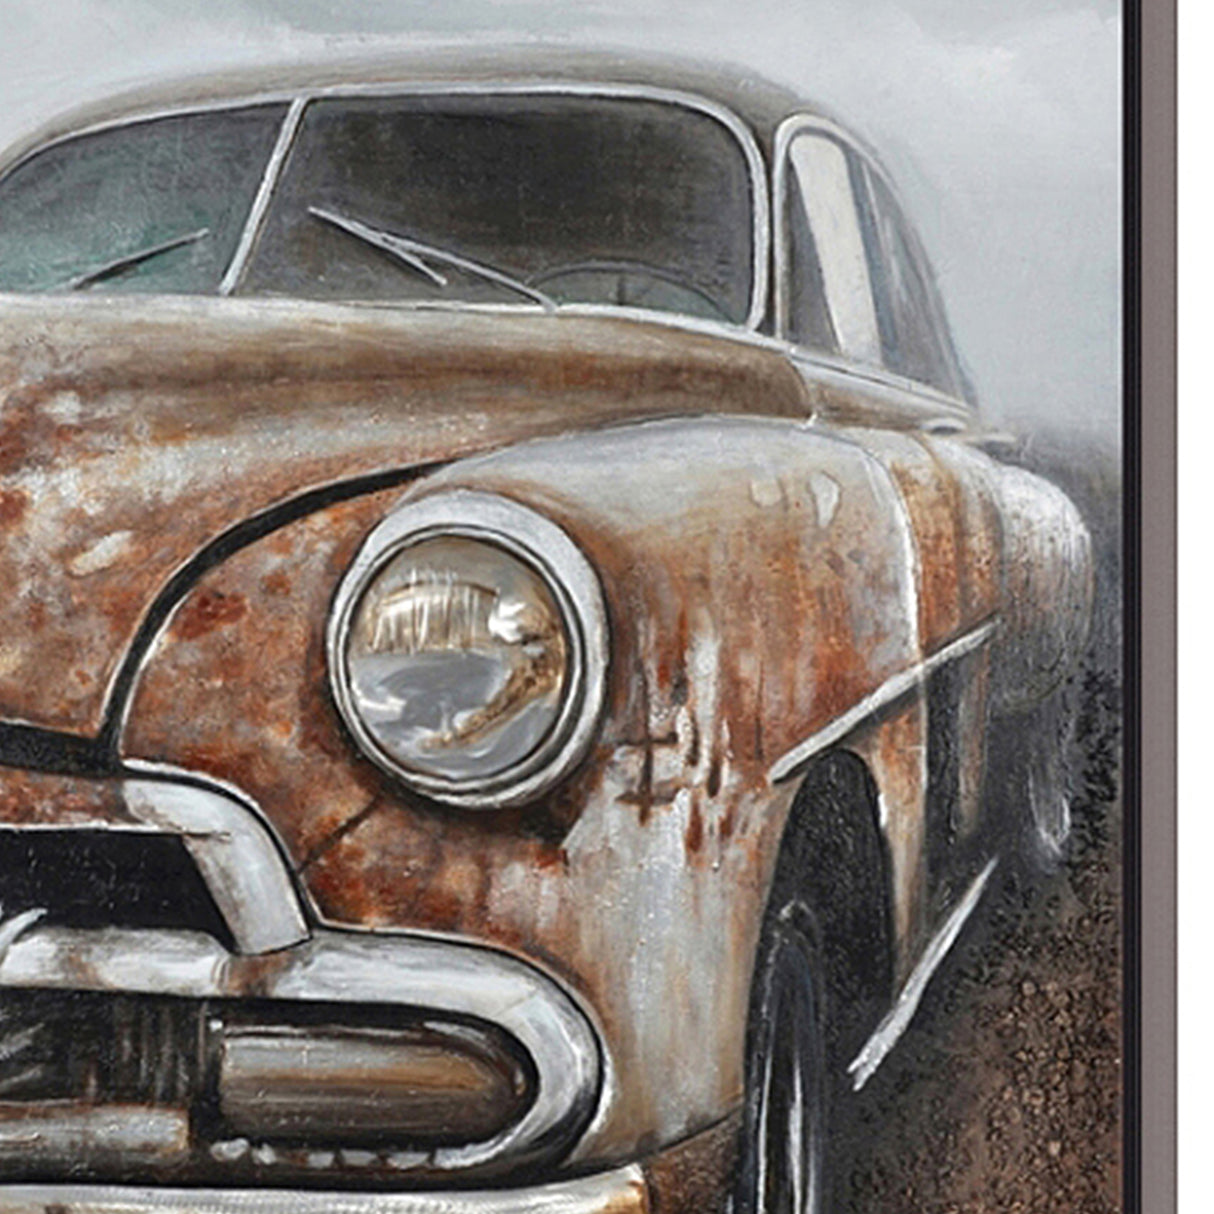 Hand Painted Acrylic and Aluminum 3D Wall Art Vintage Car 47 x 59 Rectangular Canvas with a Dark Brown Wooden Frame